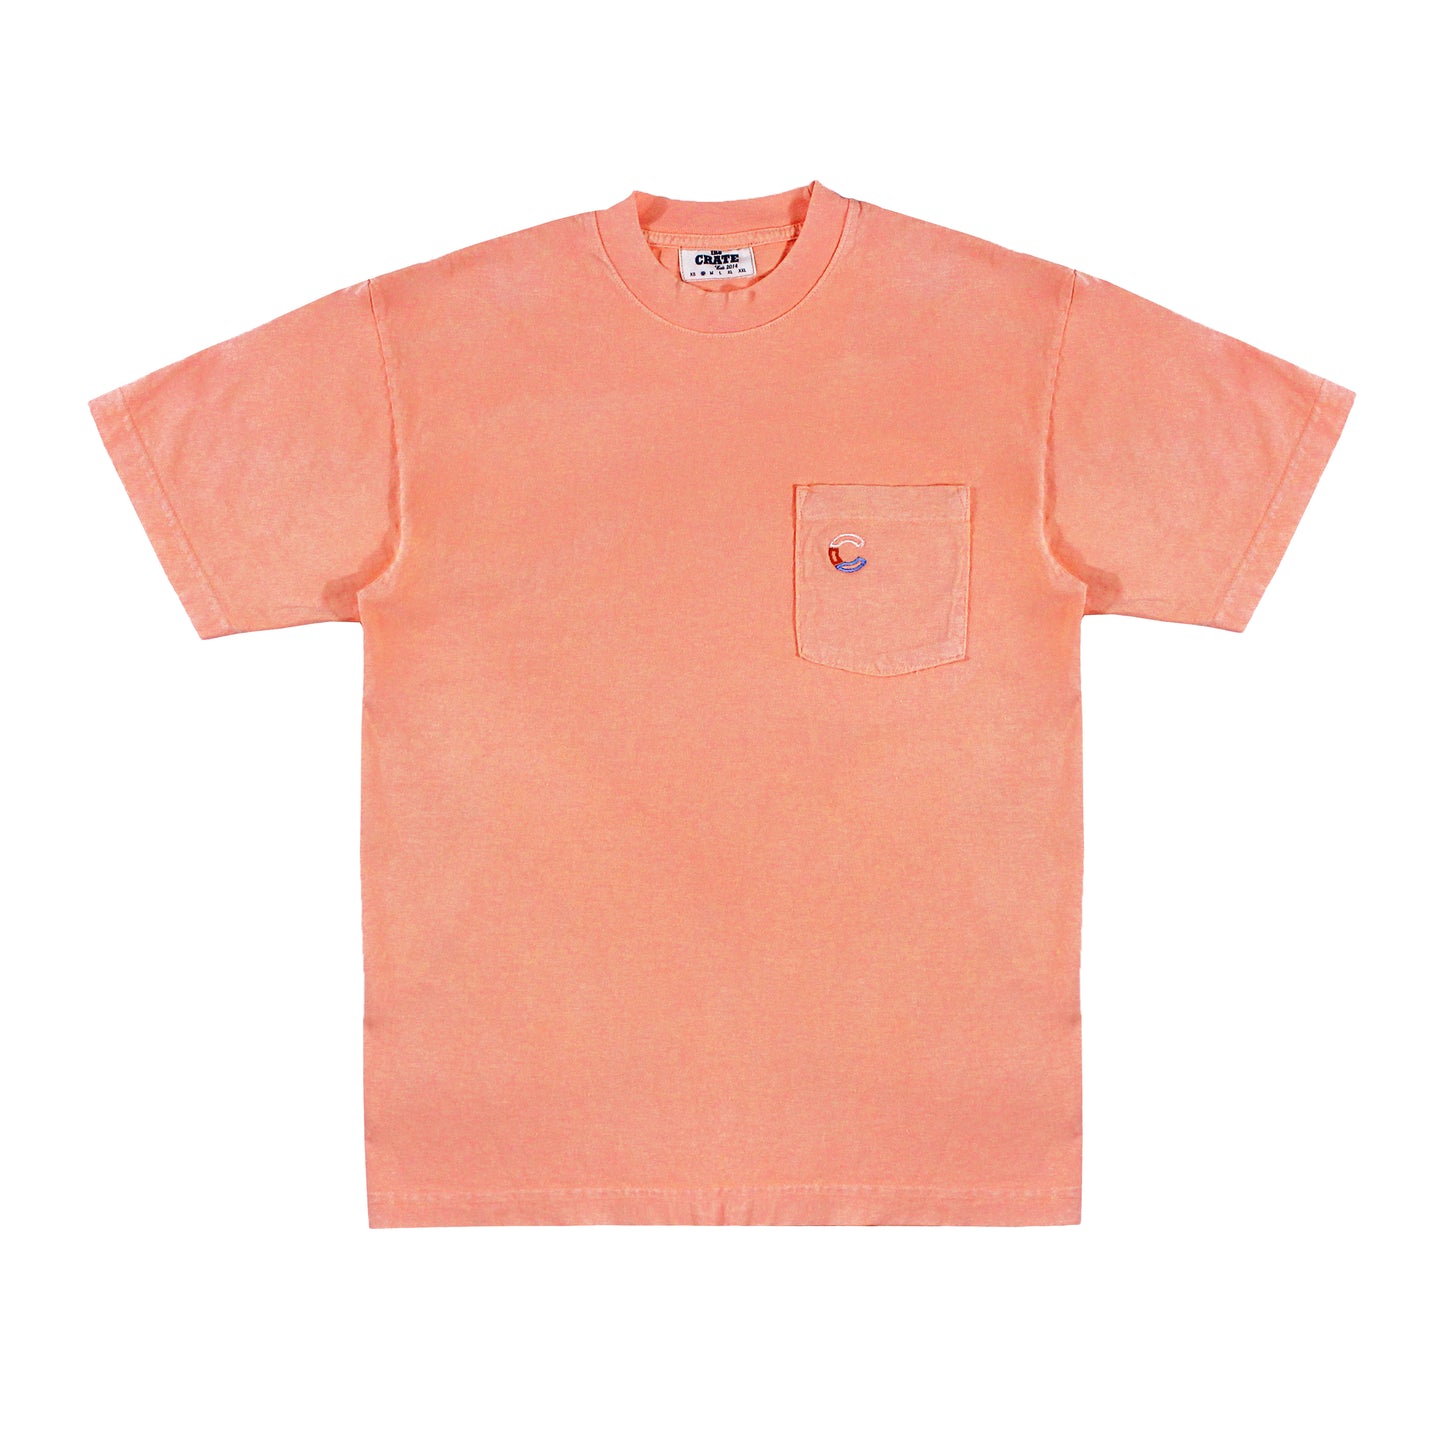 Embroidery T Shirt Infrared | the CRATE ny